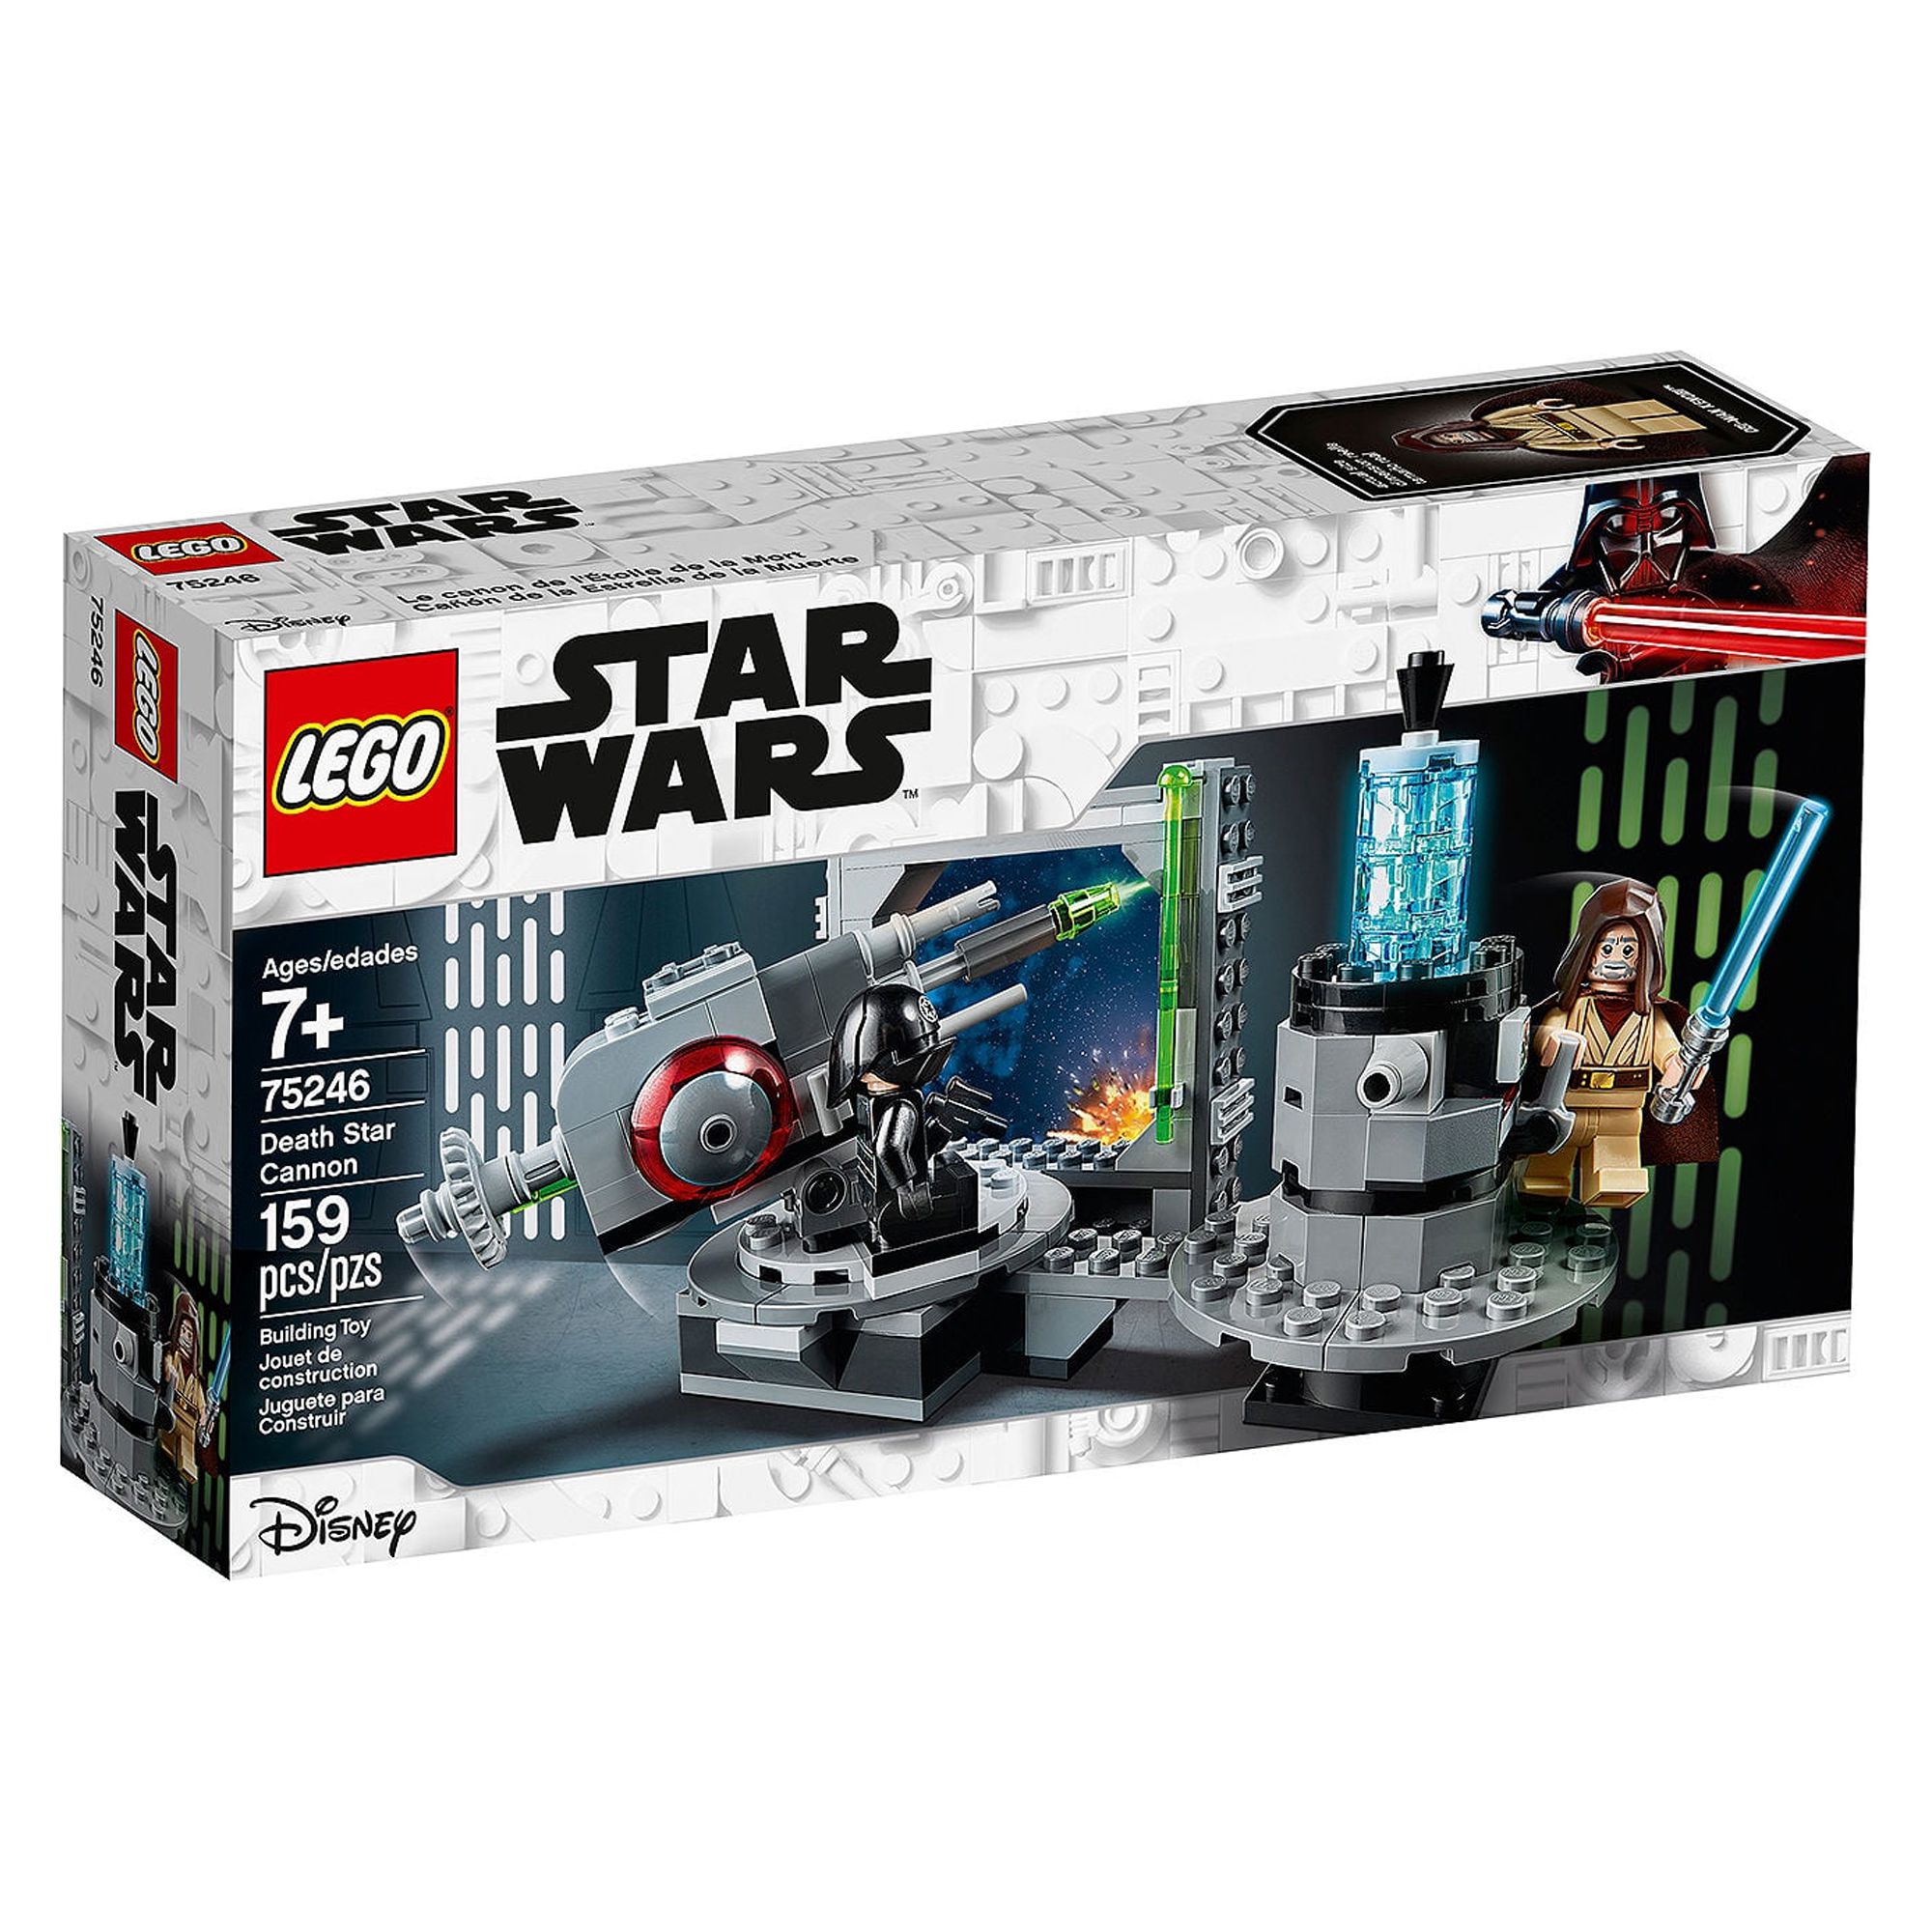 LEGO Star Wars: A New Hope Death Star Cannon 75246 Advanced Building Kit with Death Star Droid (159 Pieces) - image 5 of 5